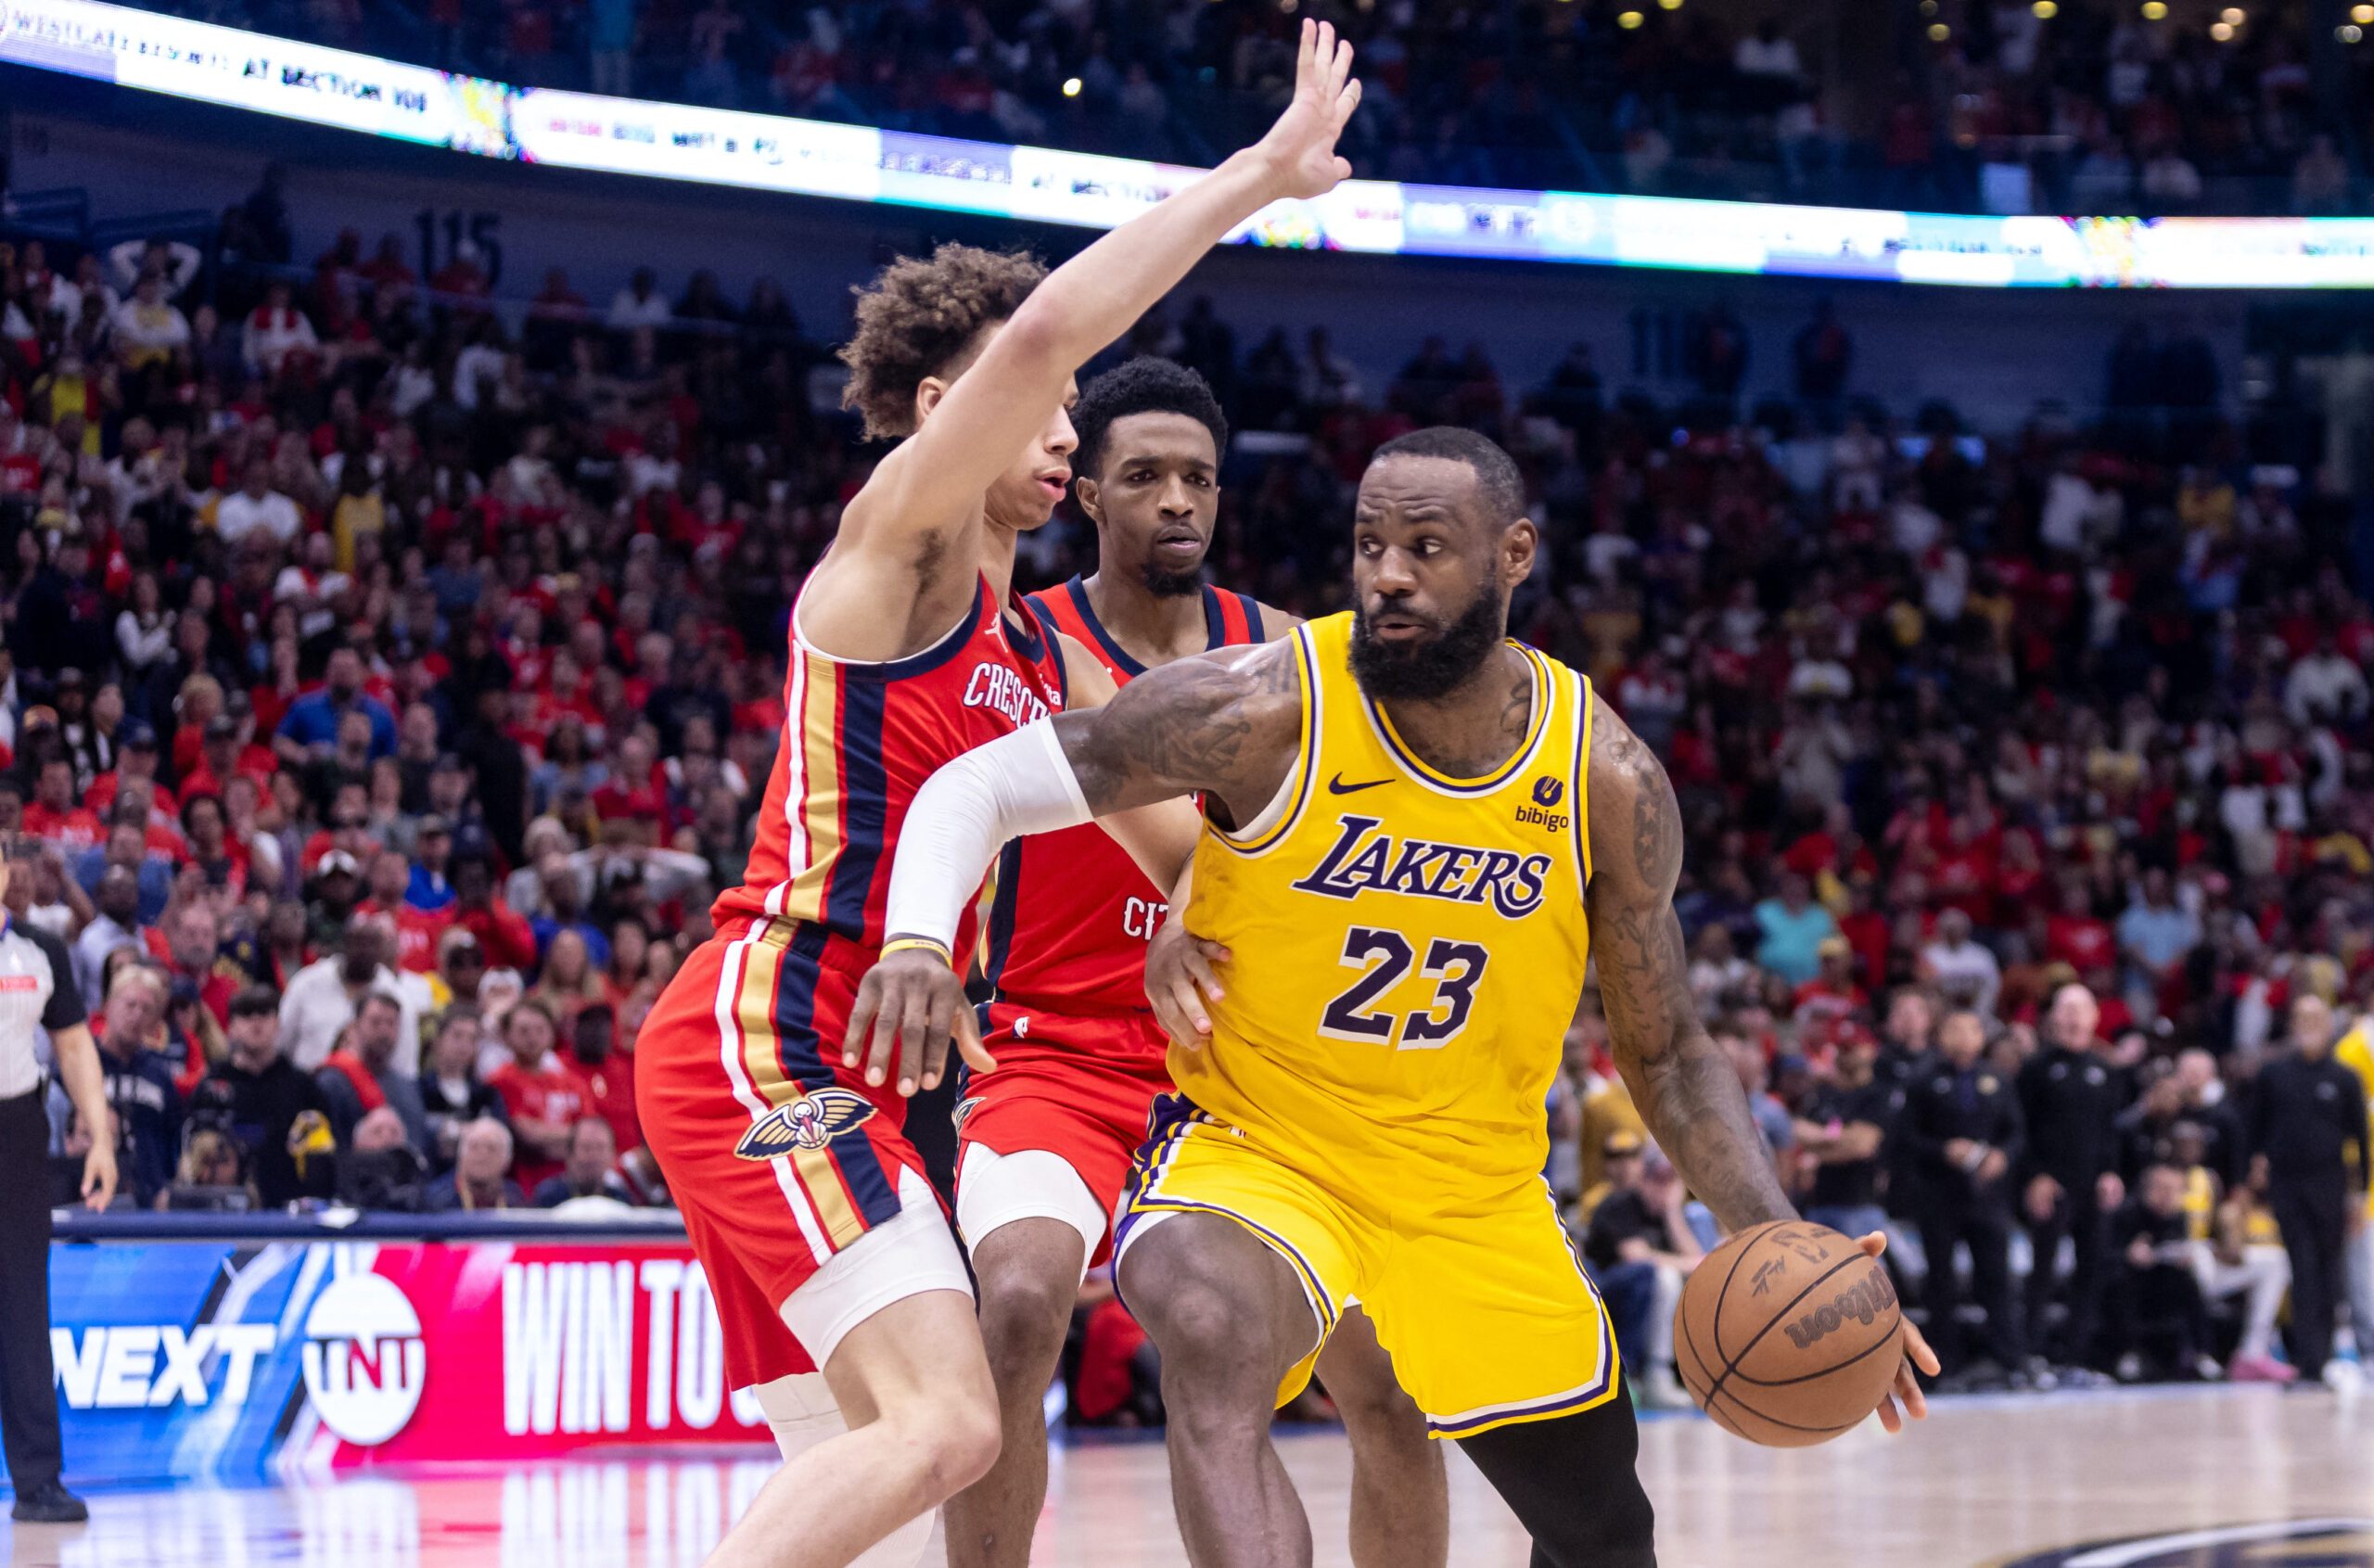 Uphill climb: LeBron, Lakers edge Pelicans, clinch playoff spot